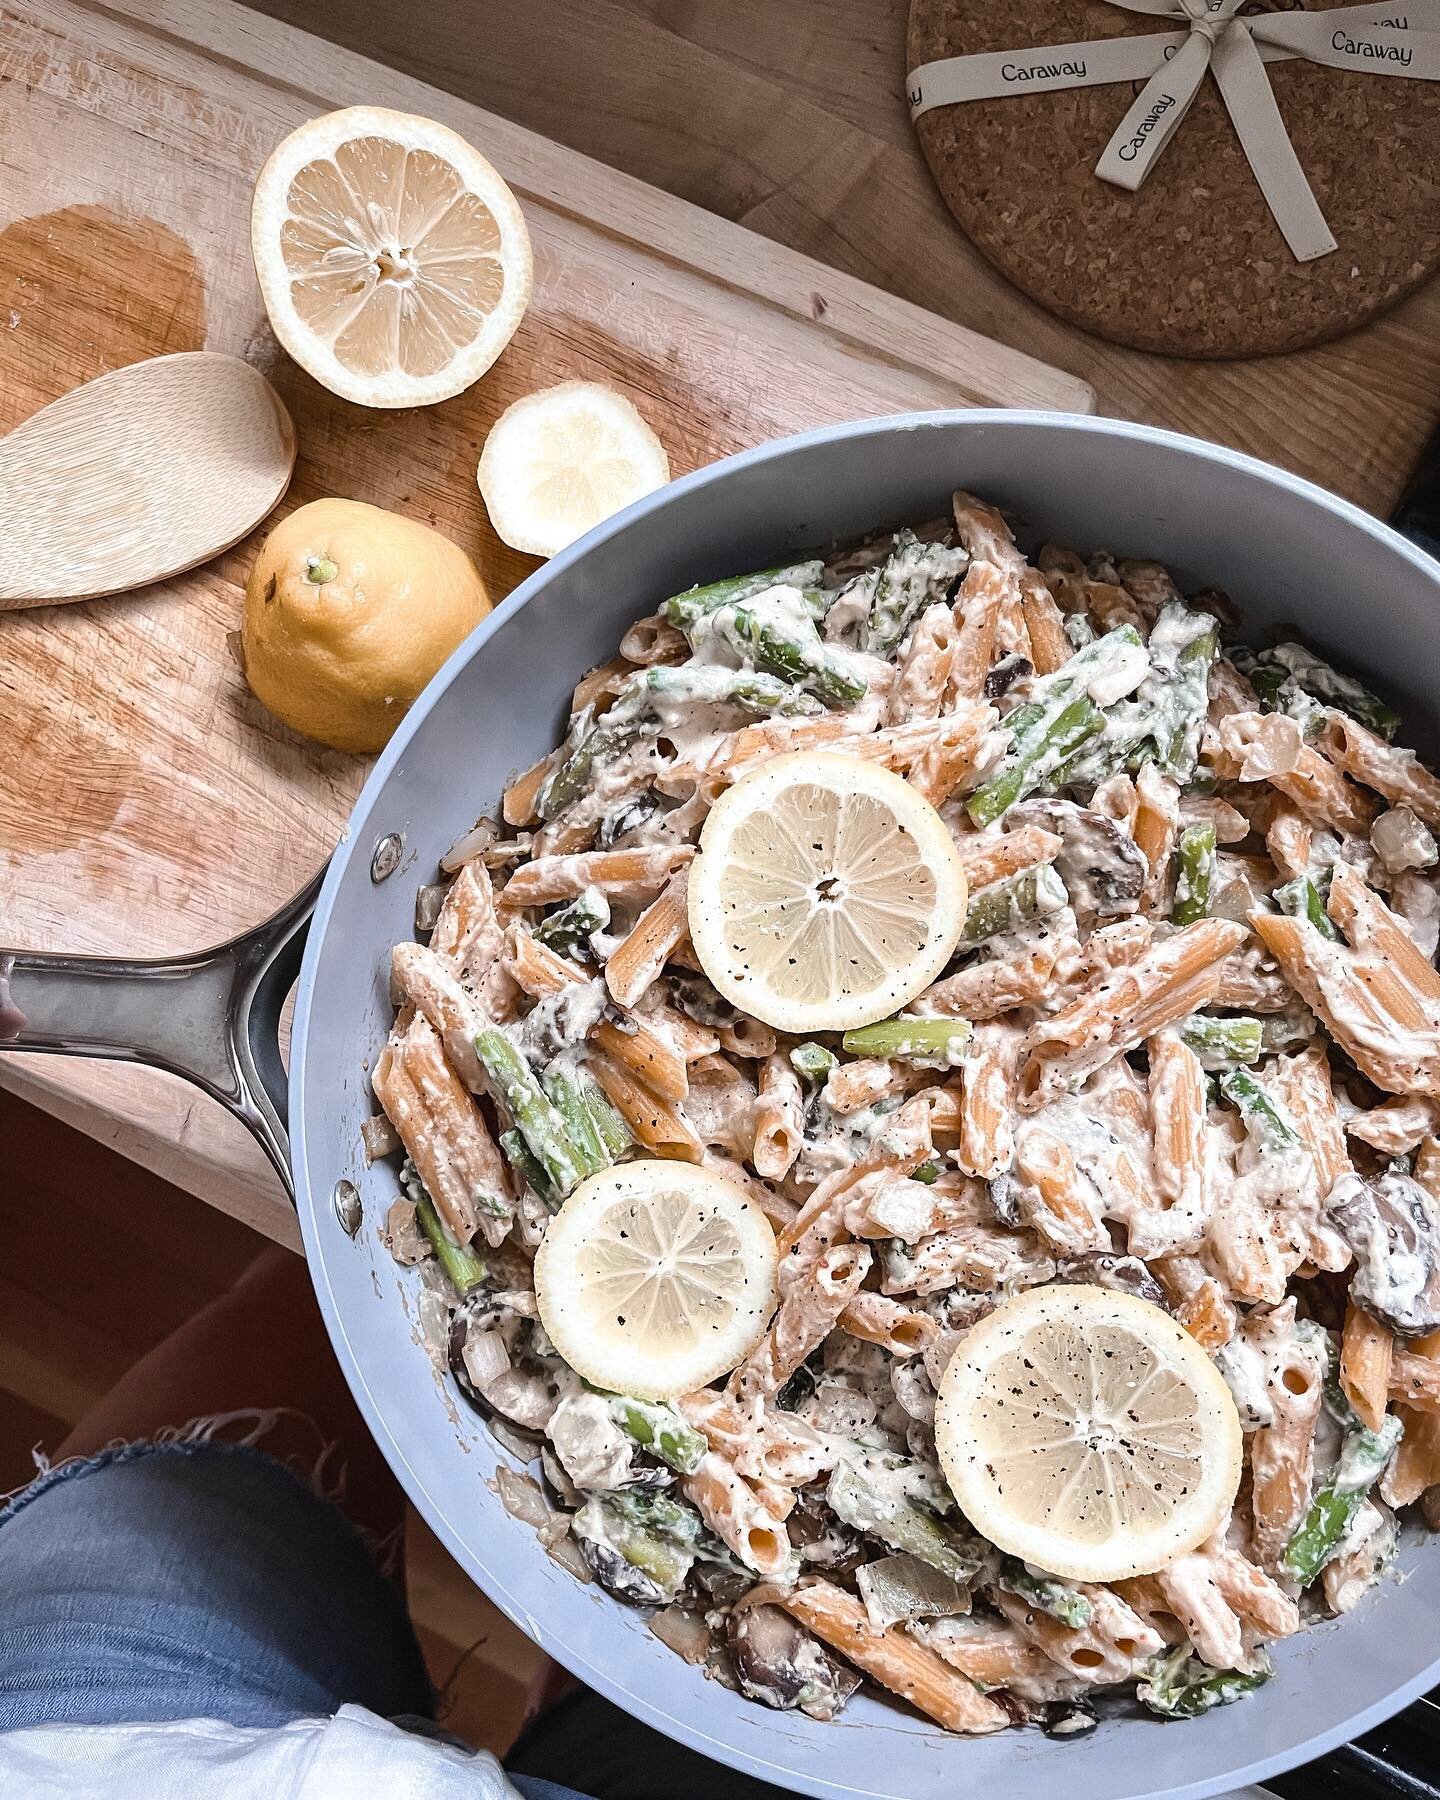 protein hack // protein pasta - swapping out typical pasta for a protein packed option is a simple way to add more protein in while still enjoying your favorite meals.

This recipe is from @shifting.nutrition + i was so excited to make it because it&